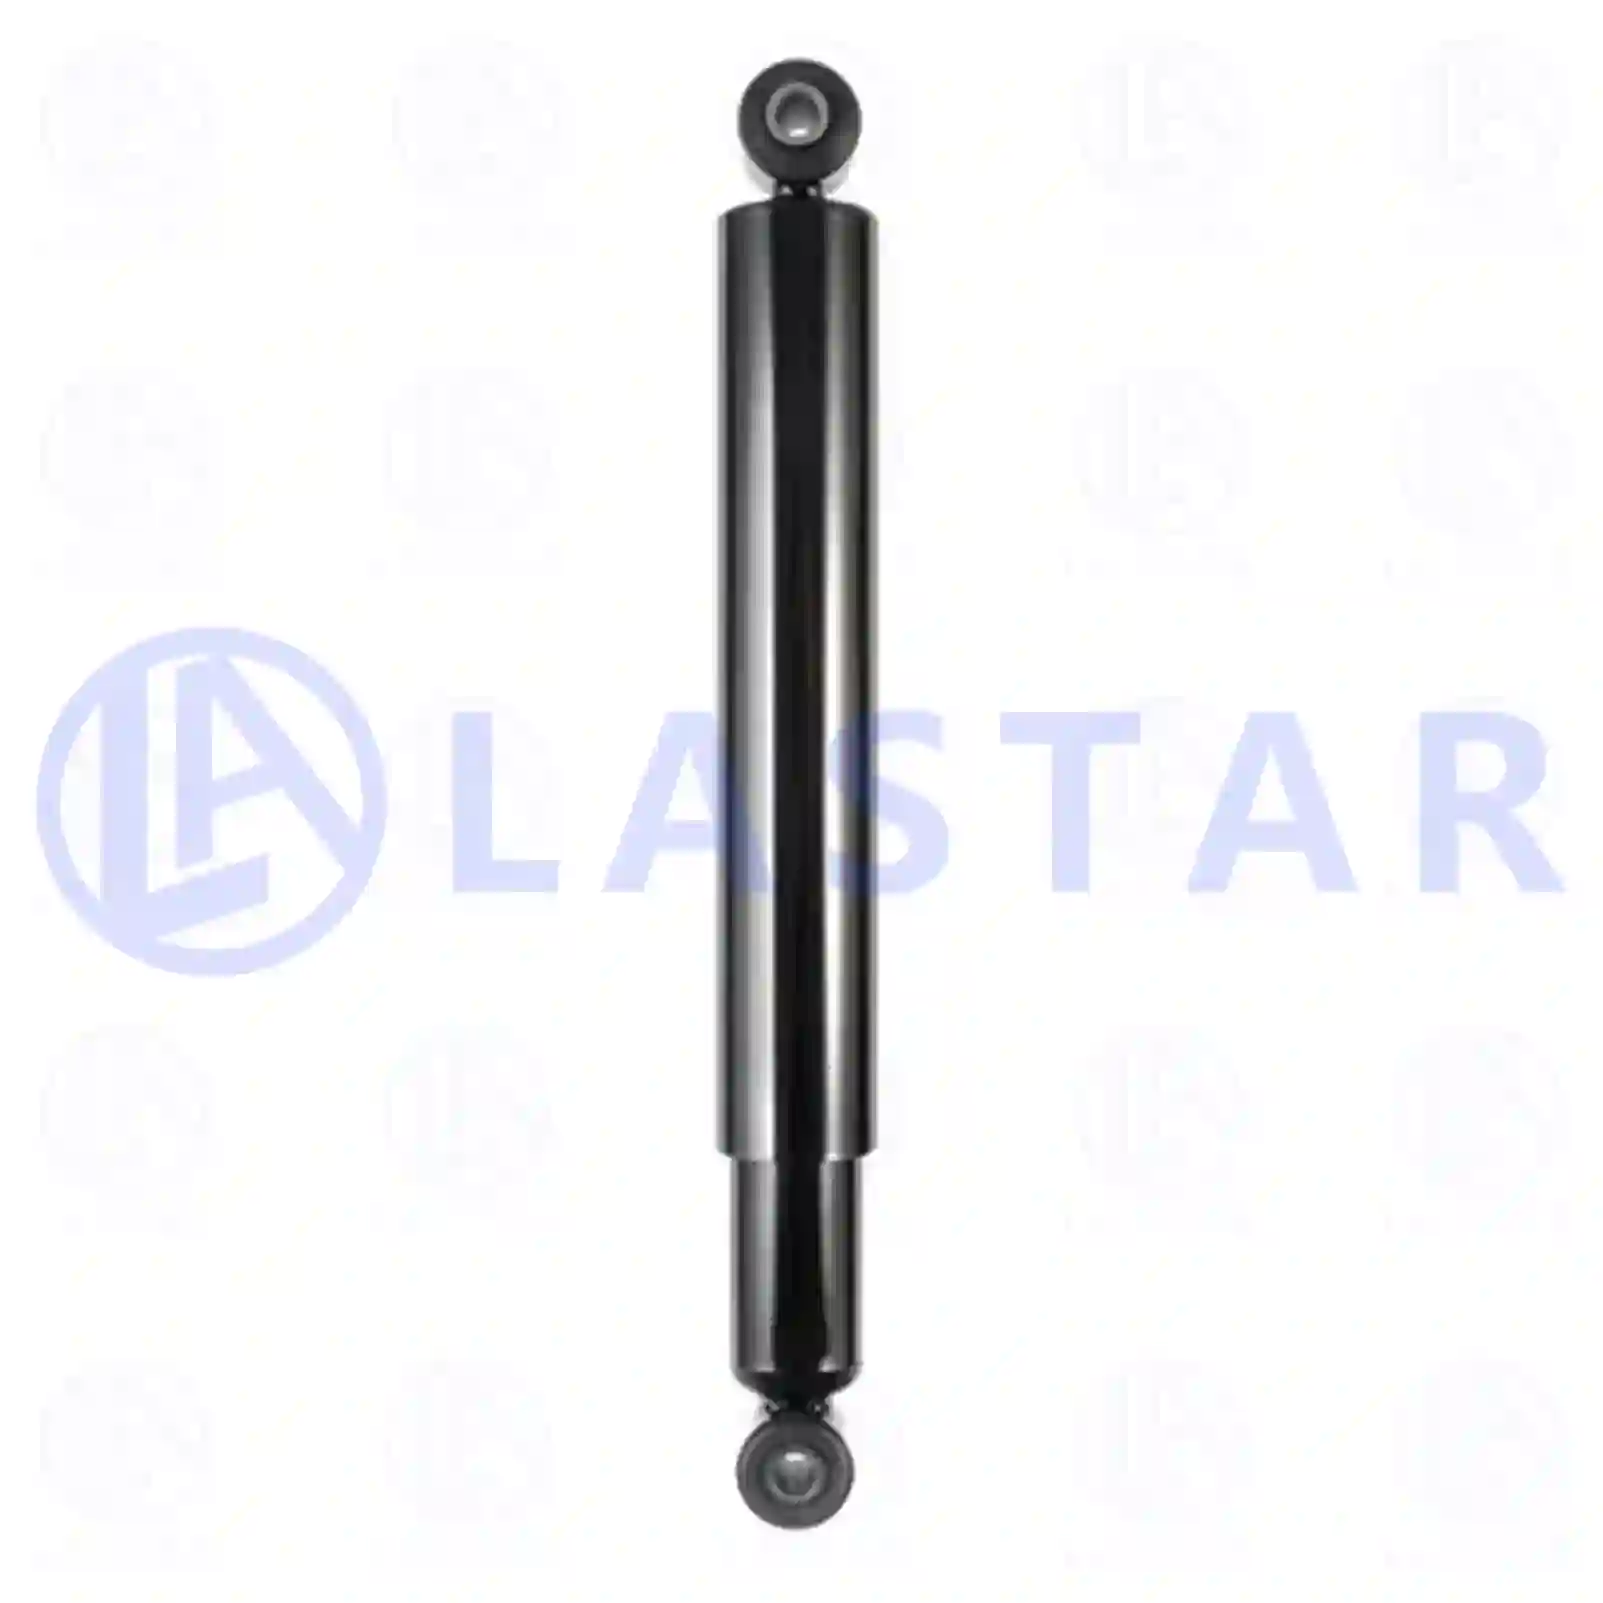 Shock absorber, 77727943, 9743230000, 9743230300, 9743230400, 9743230600, 9743231000, 9753230000 ||  77727943 Lastar Spare Part | Truck Spare Parts, Auotomotive Spare Parts Shock absorber, 77727943, 9743230000, 9743230300, 9743230400, 9743230600, 9743231000, 9753230000 ||  77727943 Lastar Spare Part | Truck Spare Parts, Auotomotive Spare Parts